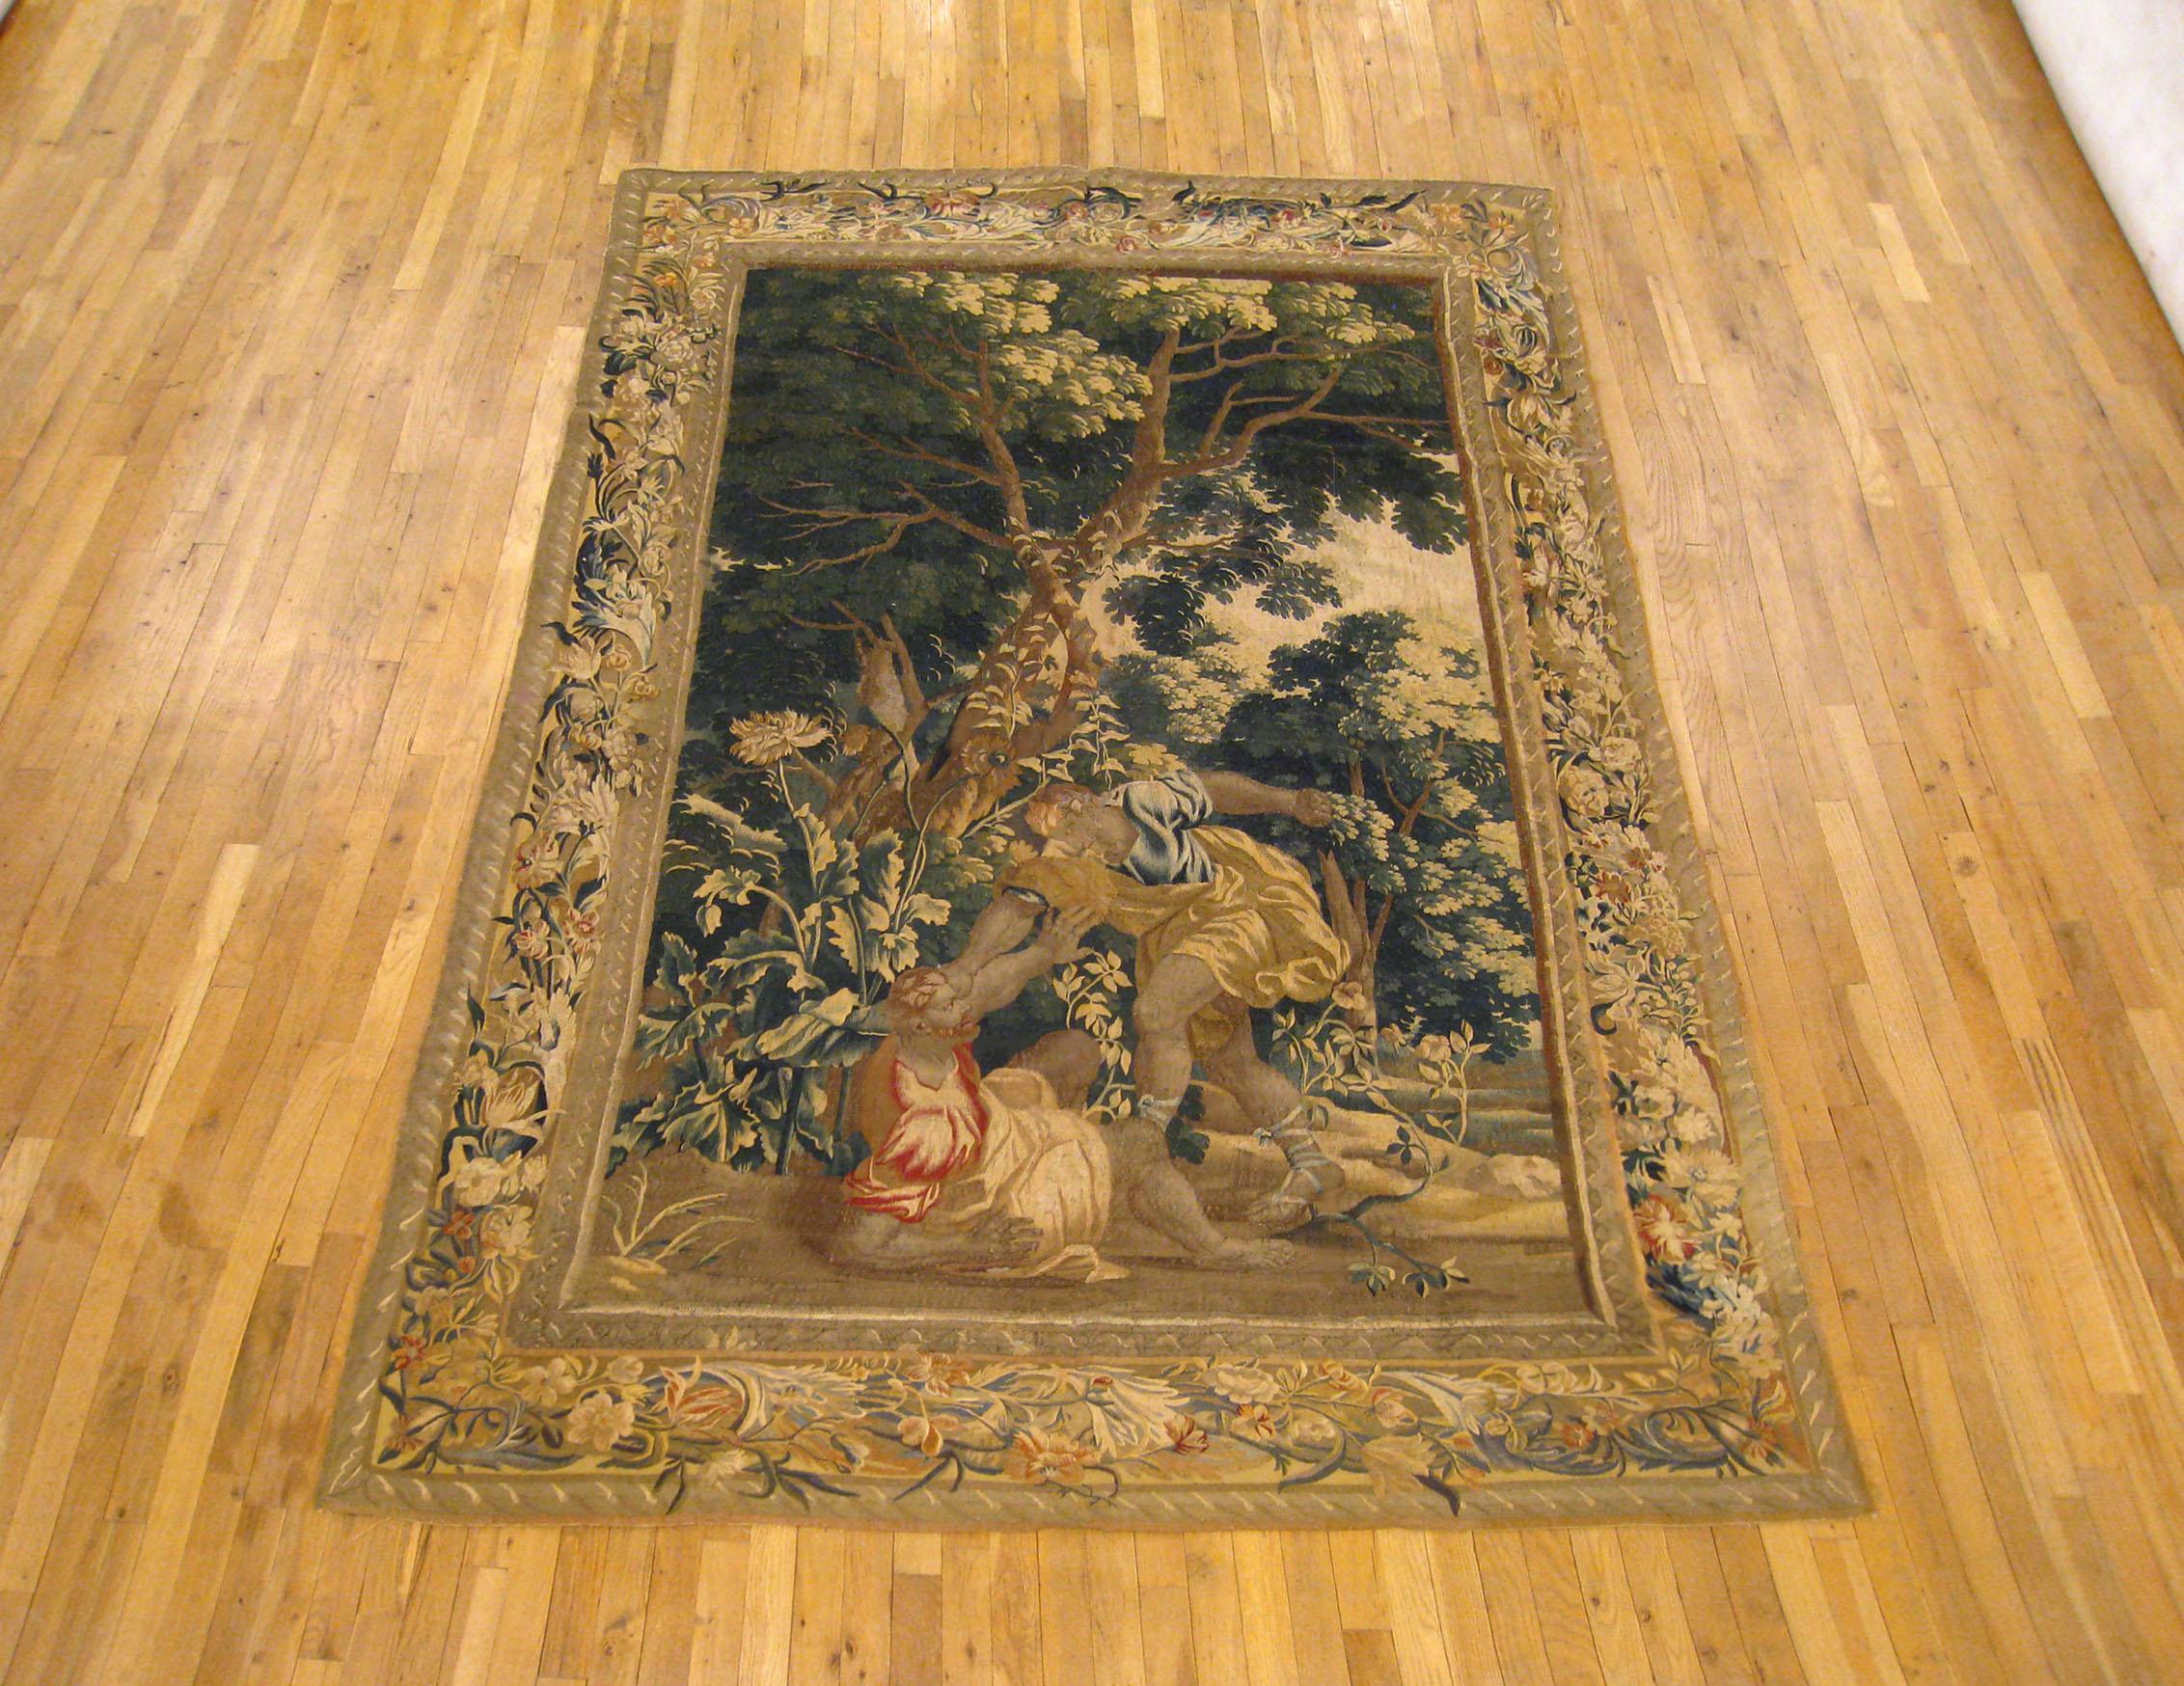 An antique late 17th century Flemish Biblical tapestry, size: 9'5 H x 6'5 W, envisioning the Old Testament Biblical conflict between Cain and Able, with Cain pushing his brother to the ground in a forest setting. Enclosed within a scrolling foliate